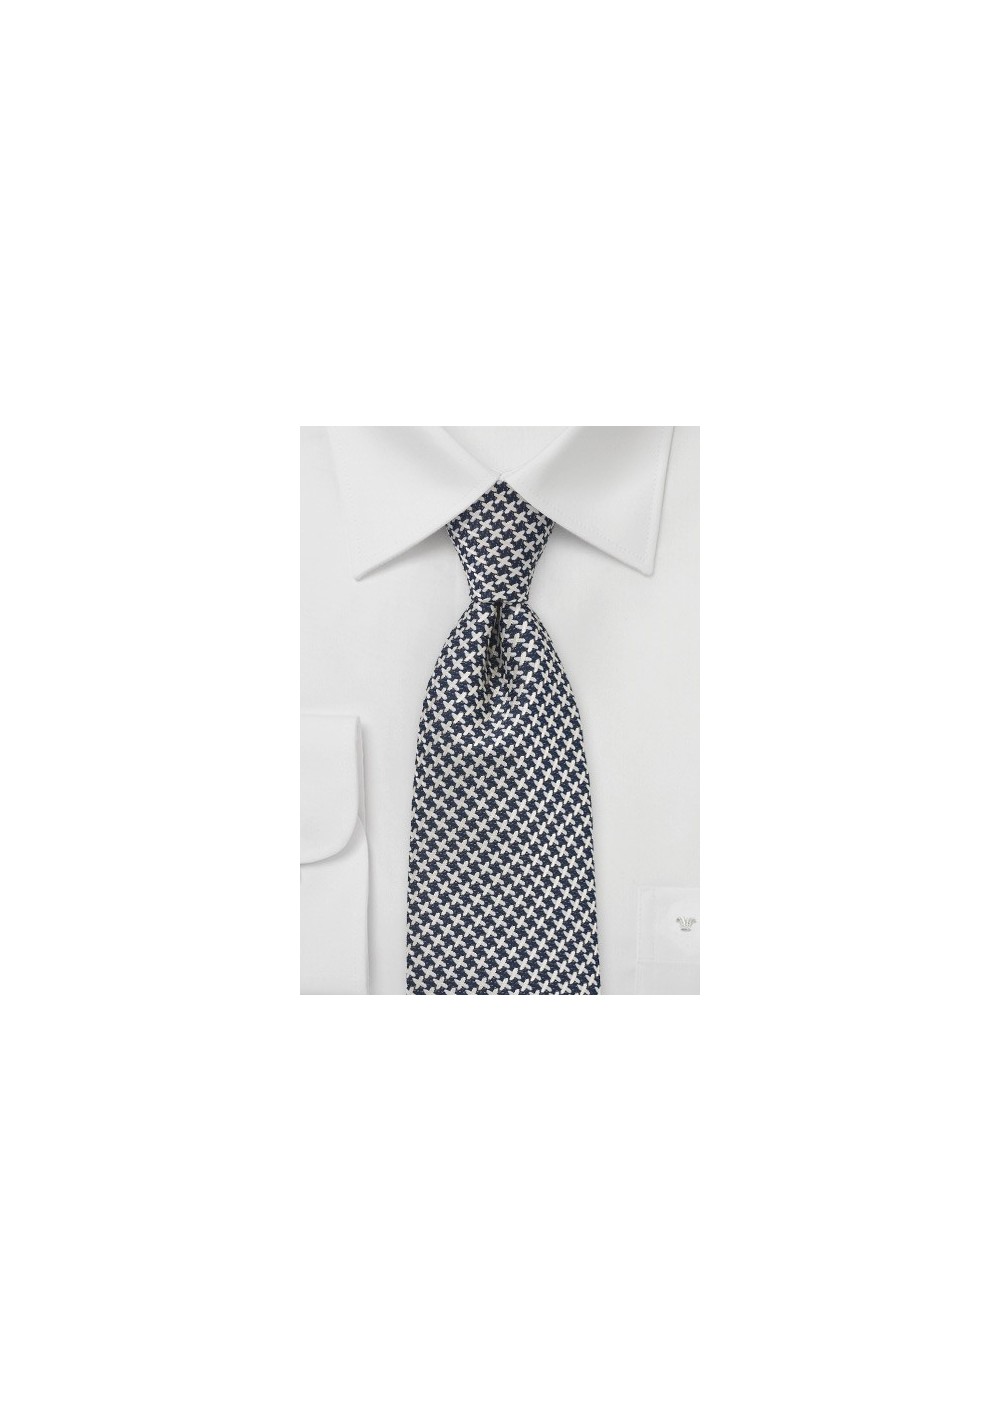 X Patterned Tie in Black and Oatmeal